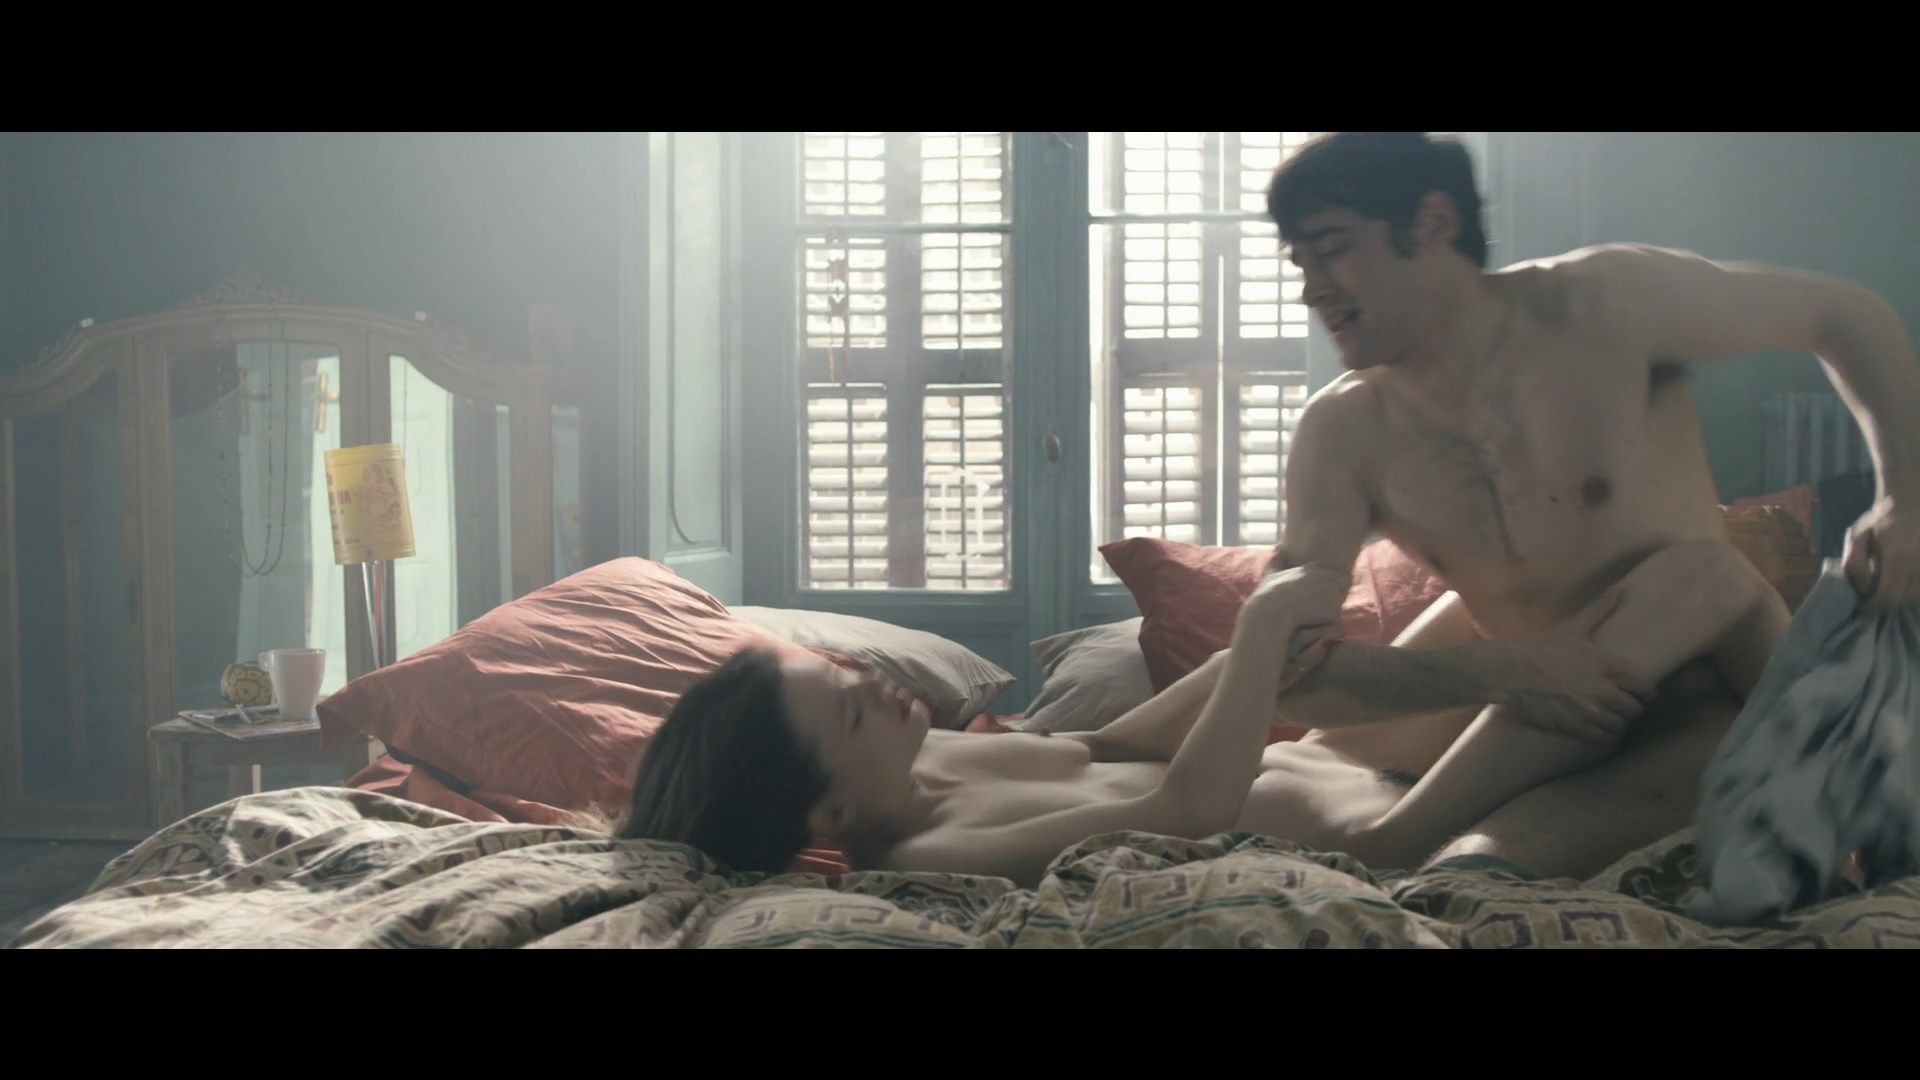 Fully naked Astrid-Bergès Frisbey has sex with some guy in this awesome sex...